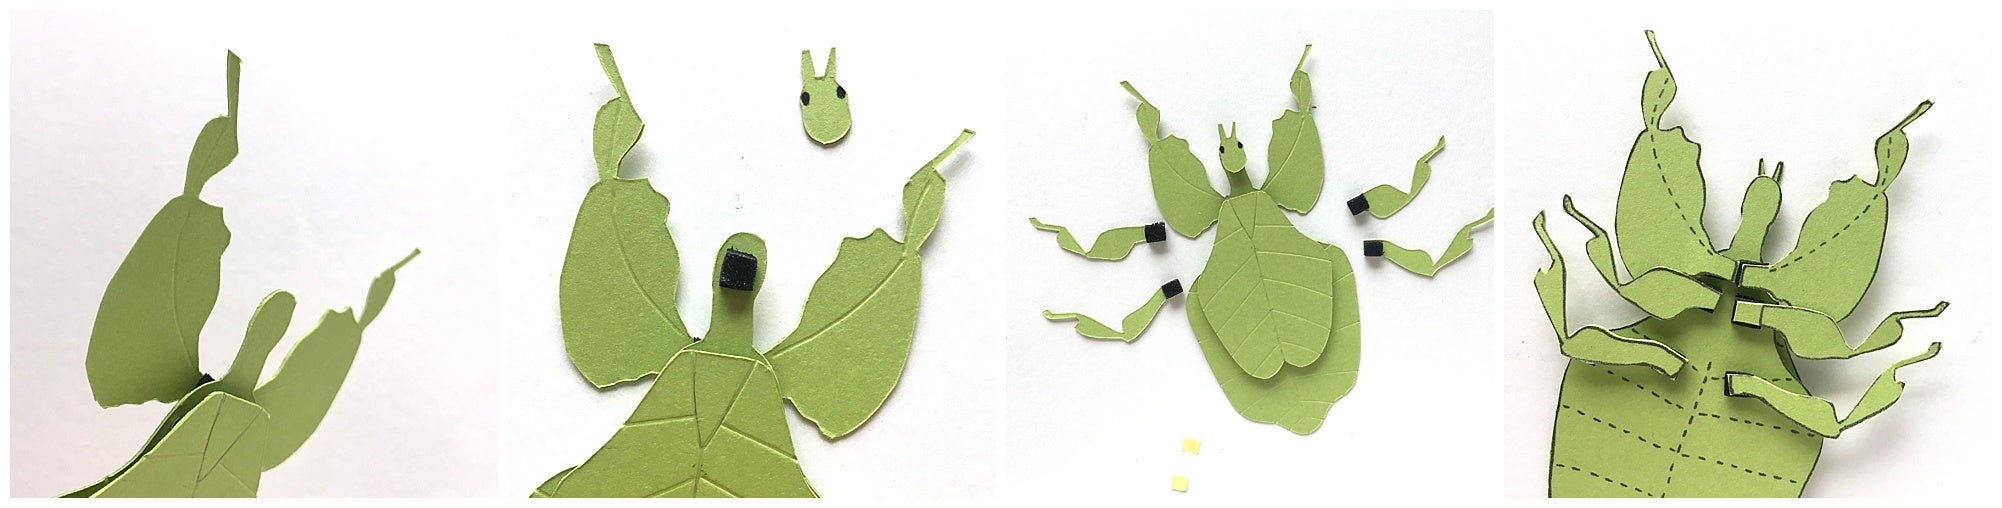 Cardstock Leaf Insect Paper Sculpture Assembly